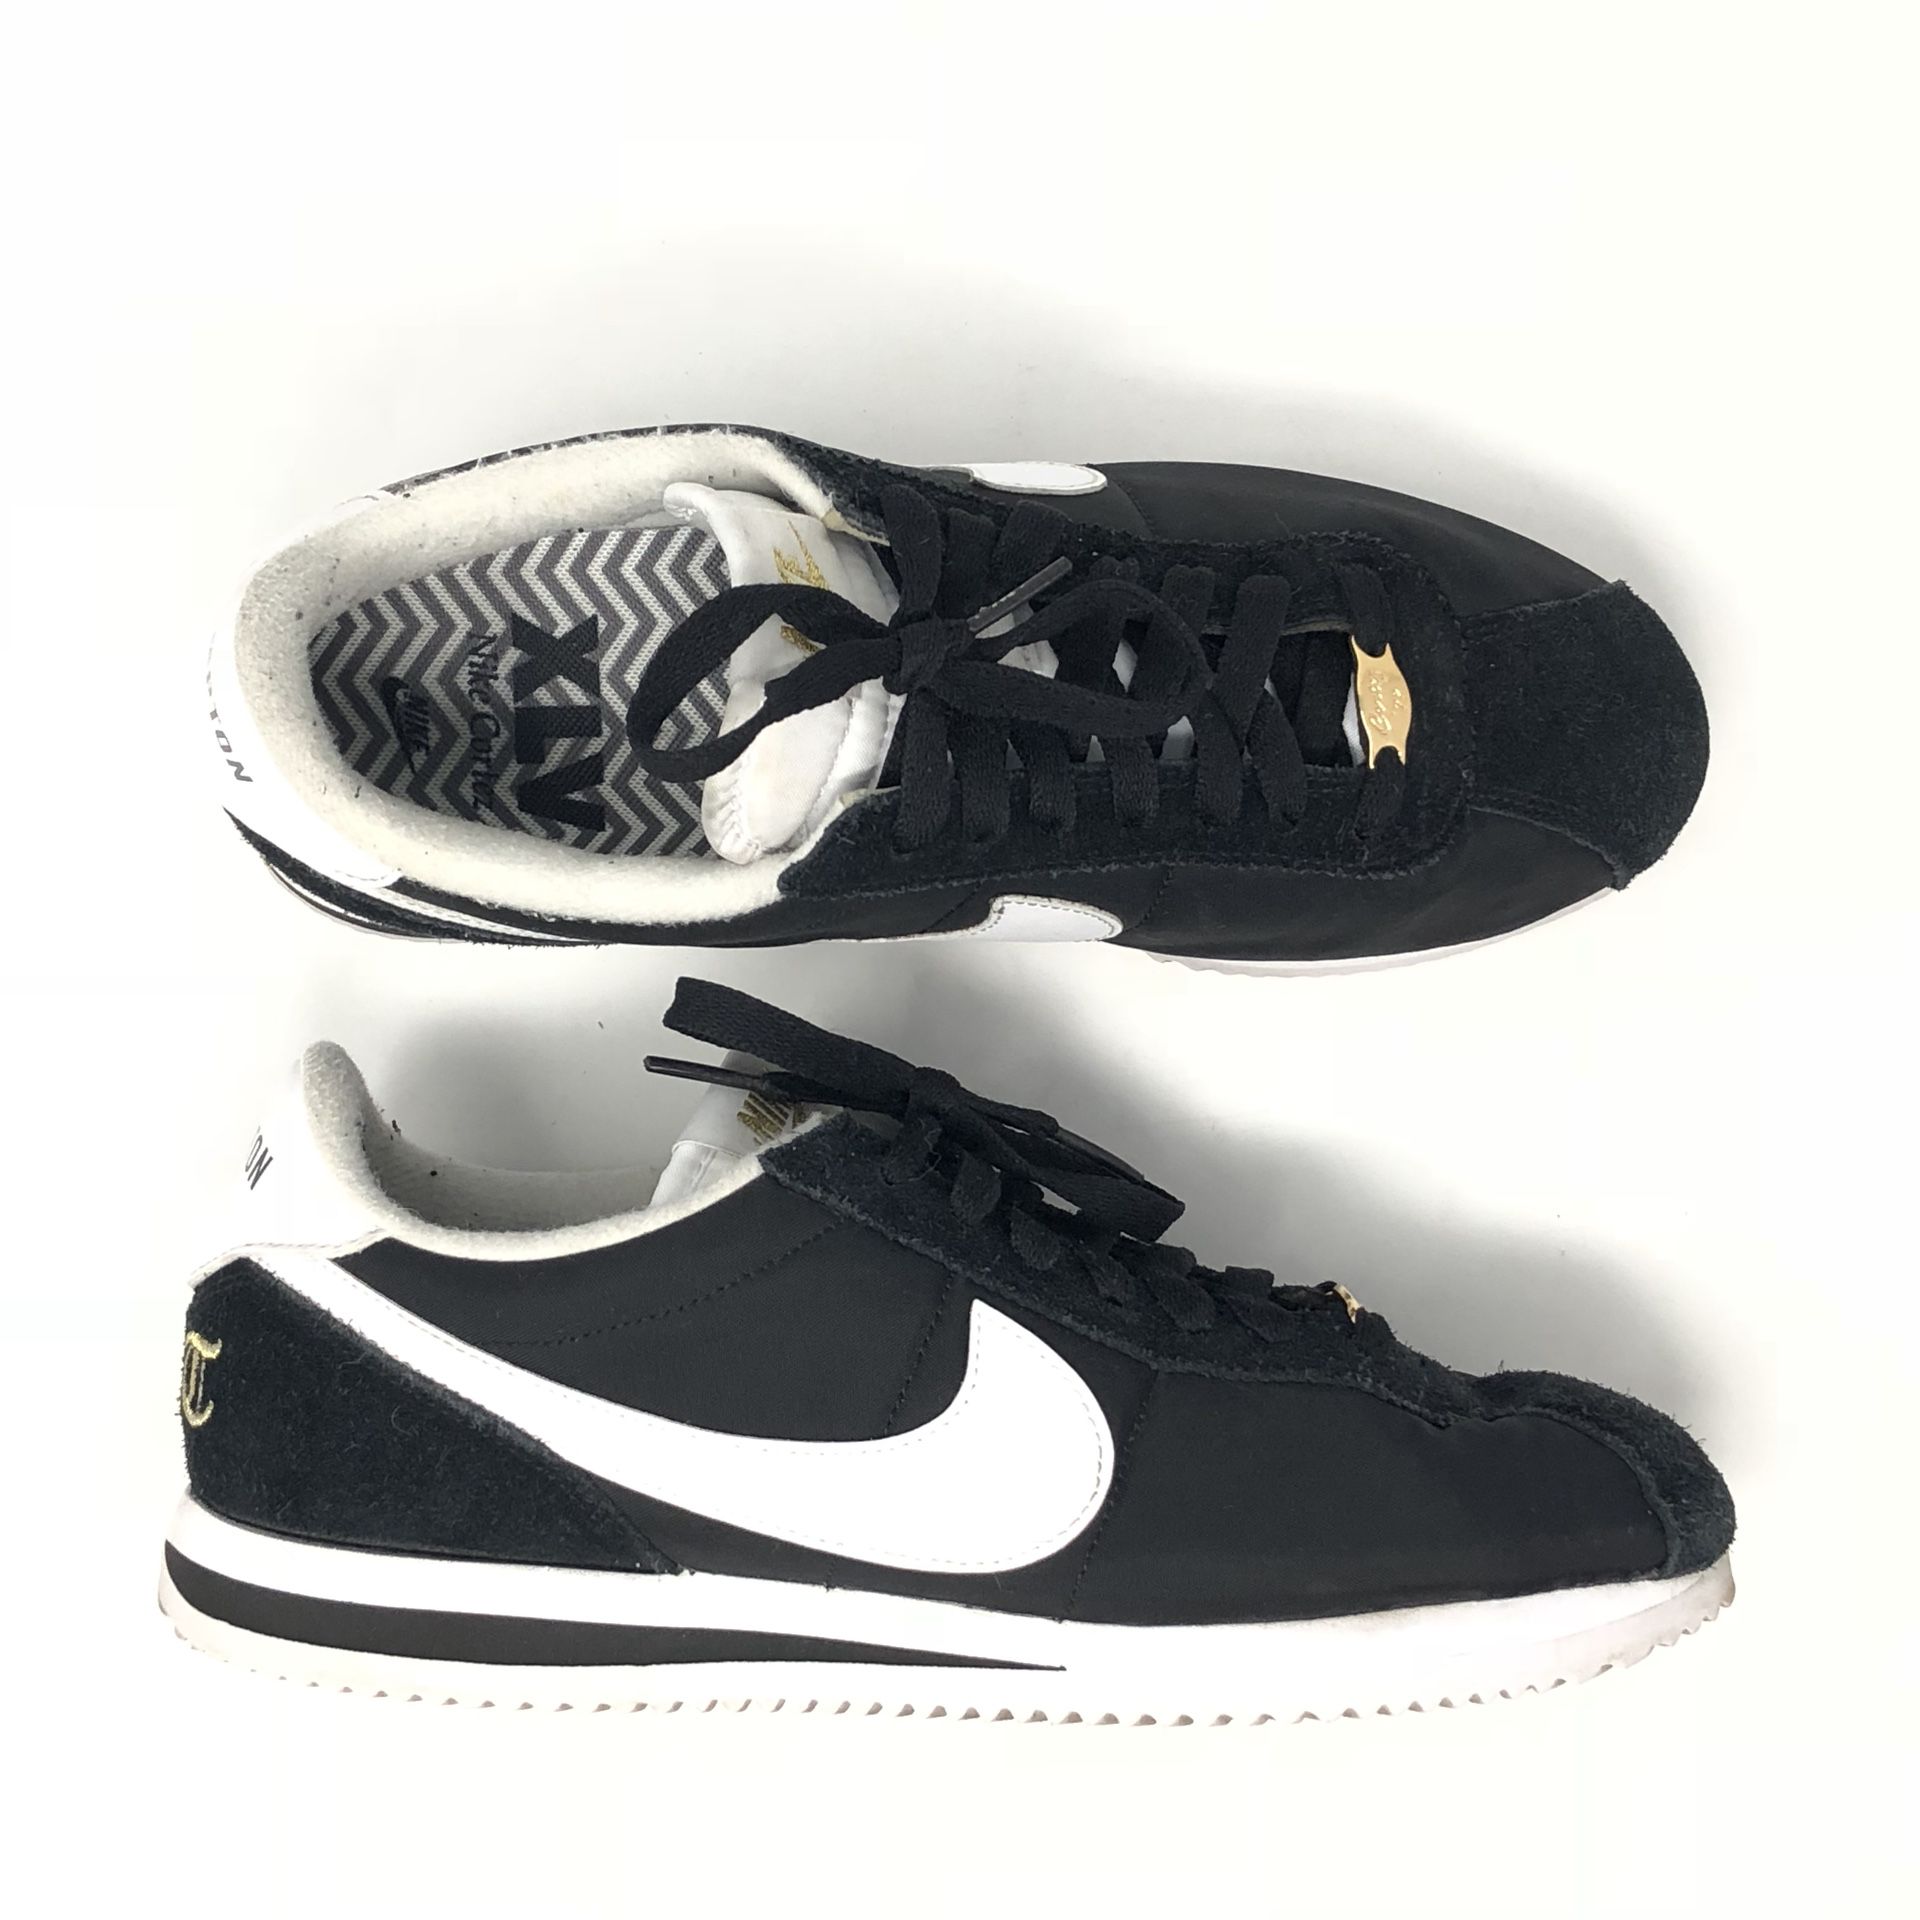 Mens Nike Cortez 1972 XLV CPT Compton Kendrick Lamar The Game NWA Eazy-E for in Tracy, - OfferUp